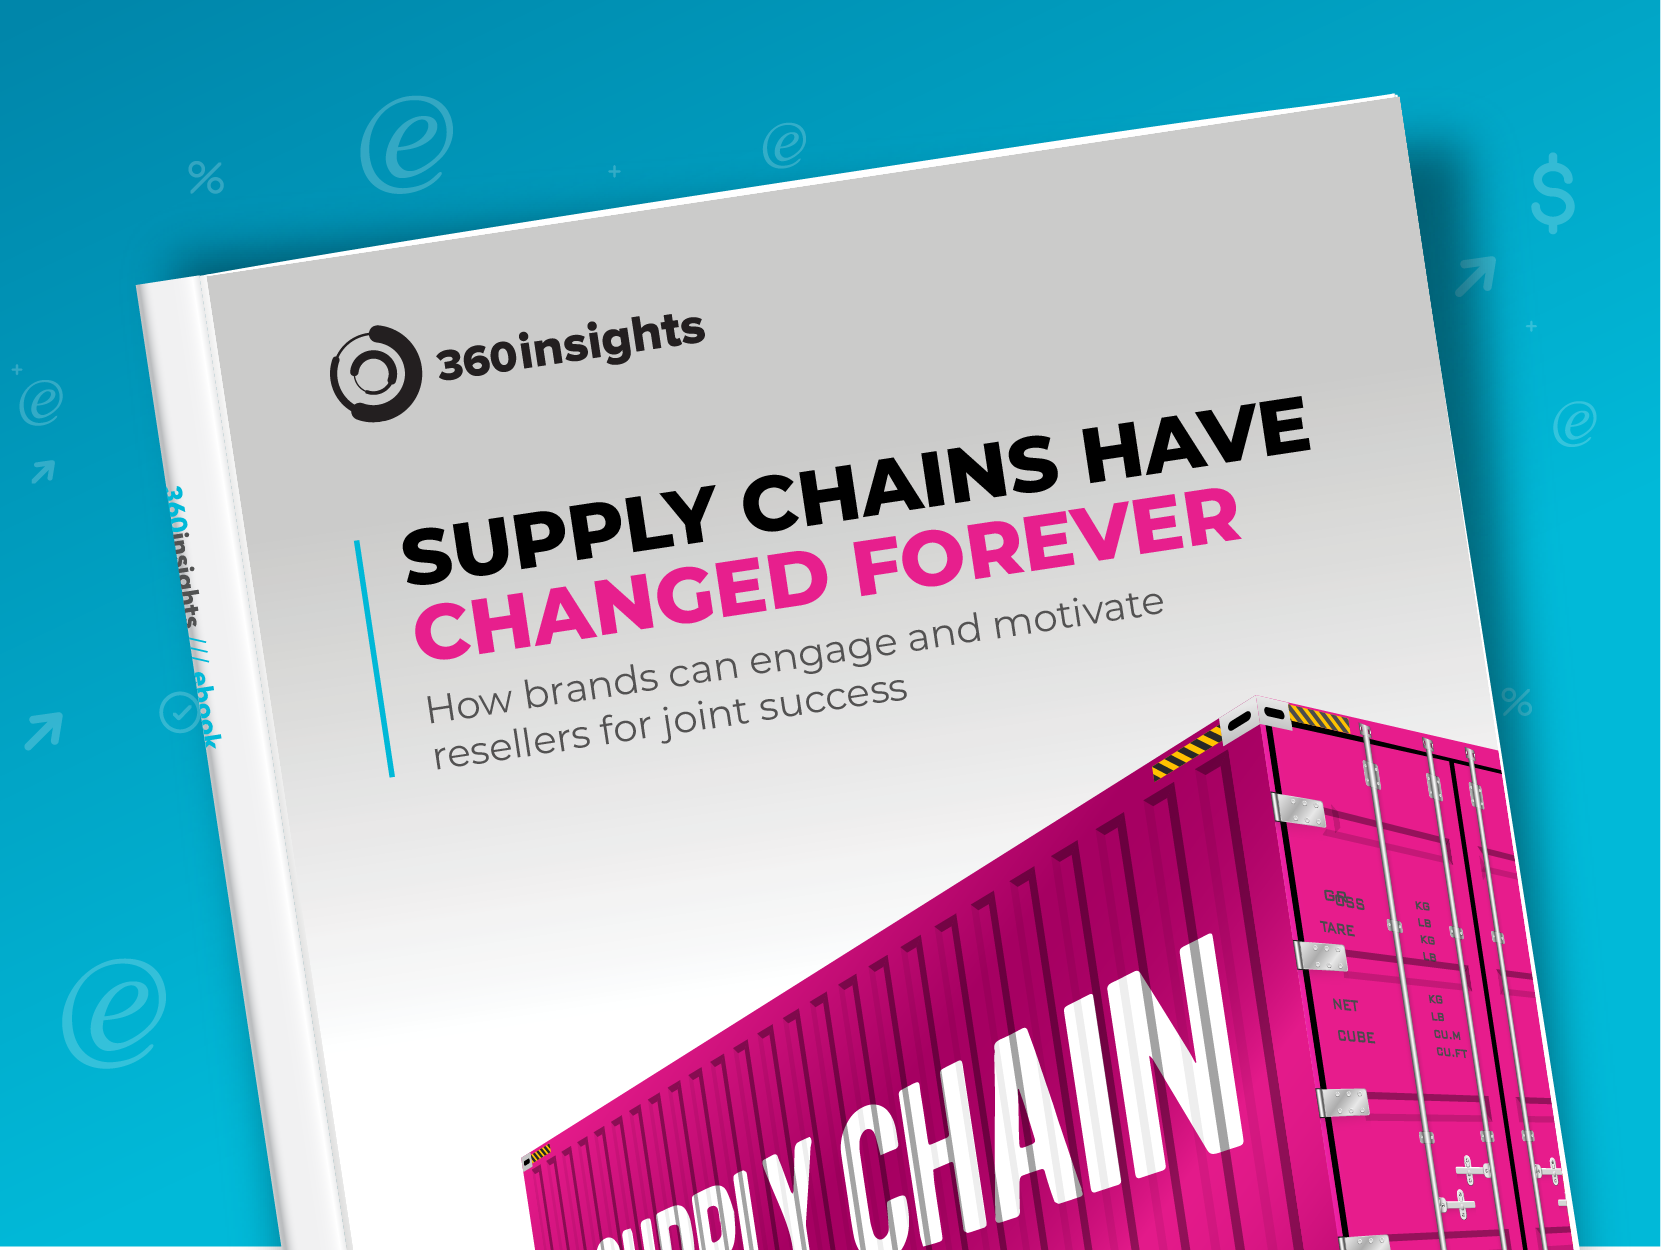 eBook about the changing supply chains and how business can engage a motivate for success